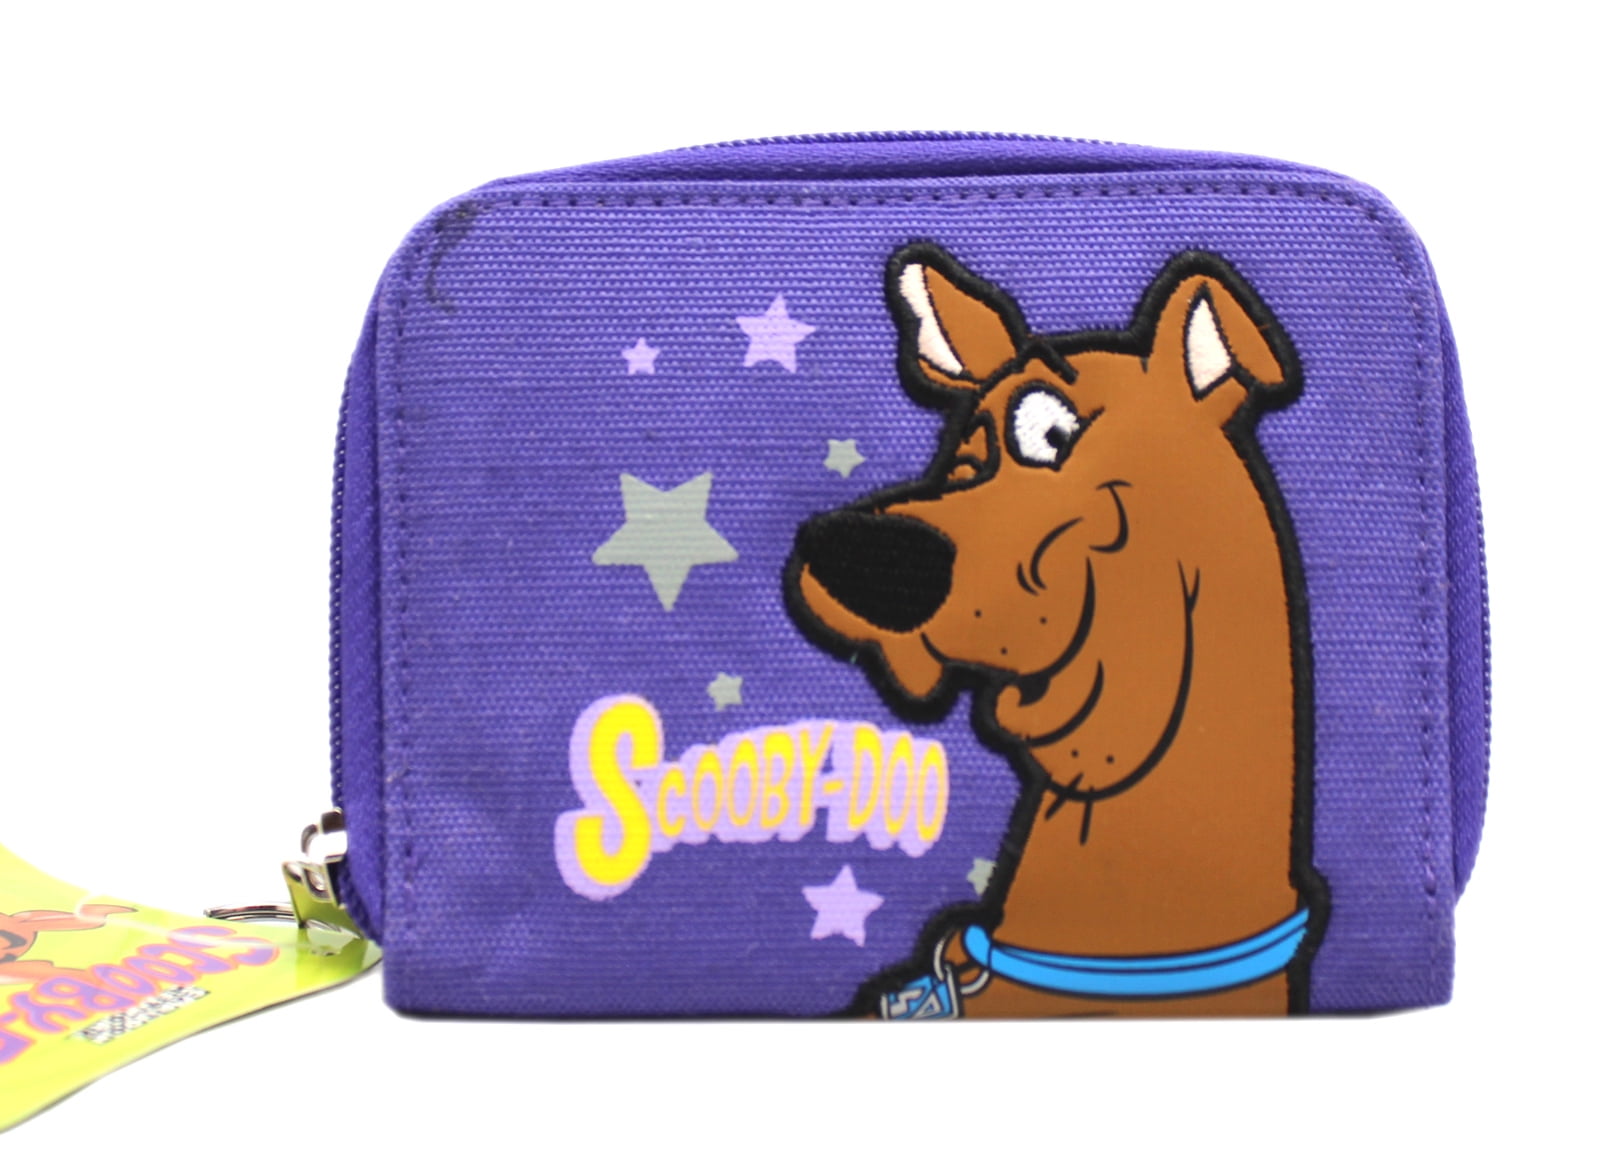 PURPLE Scooby-Doo Tri-Fold Wallet 4.5" x 3.25" BRAND NEW WITH TAGS 